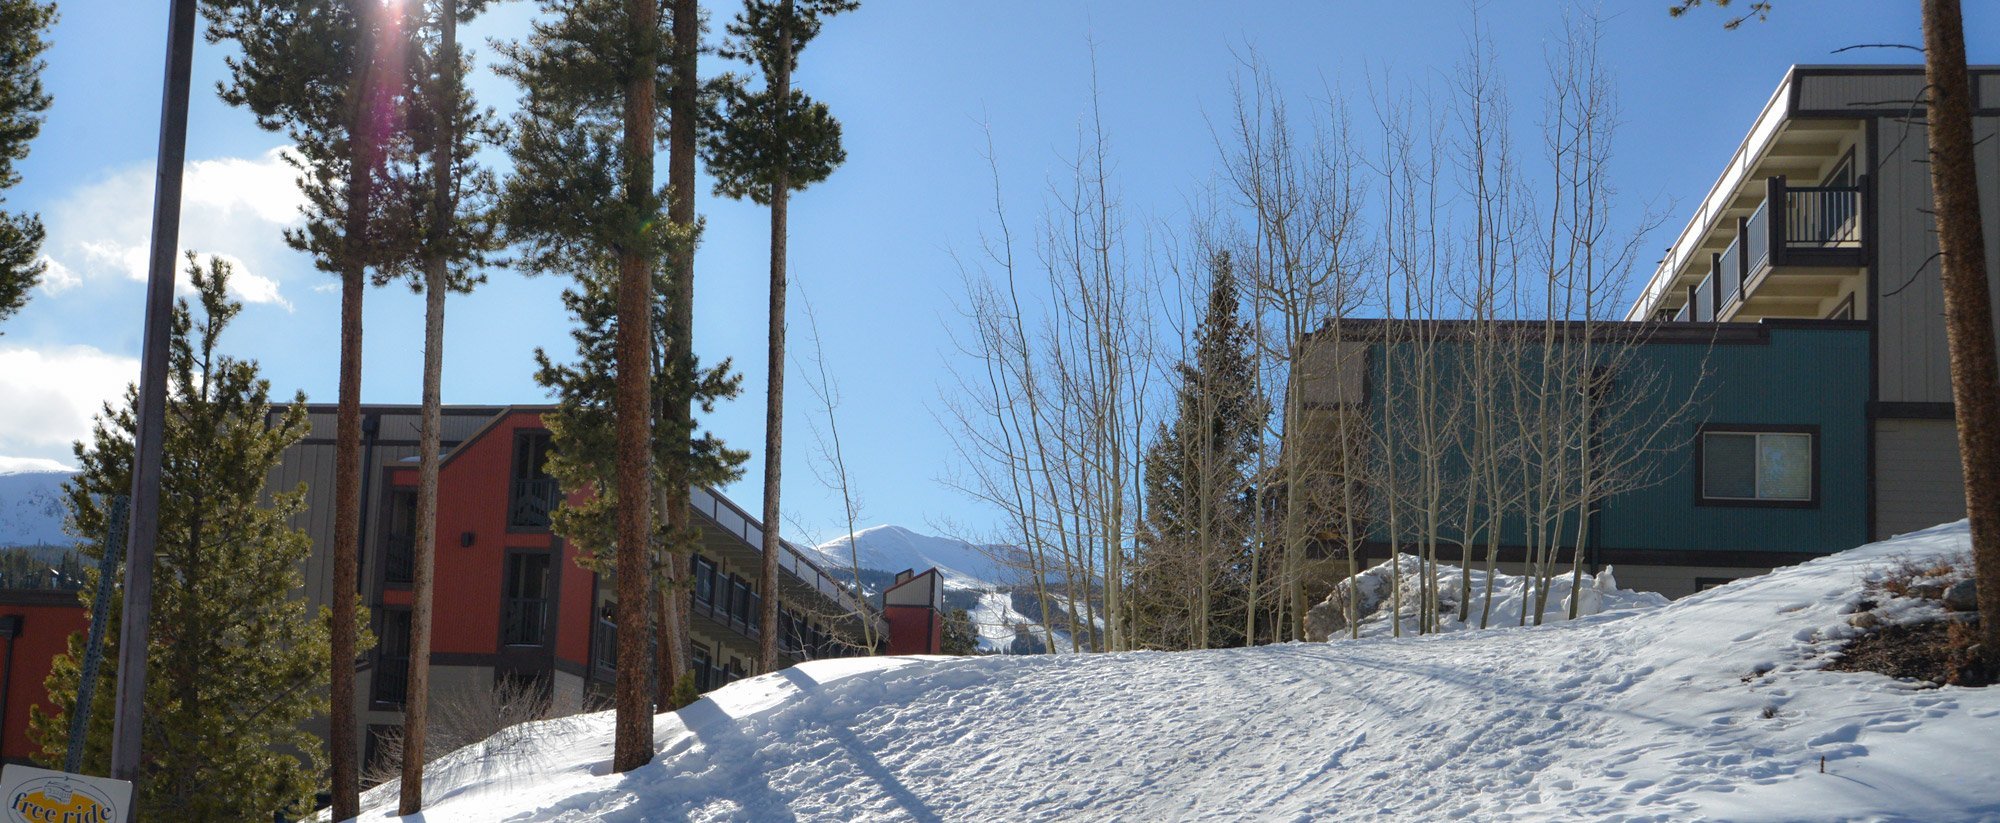 Ski and Racket Club Townhomes Winter 2018